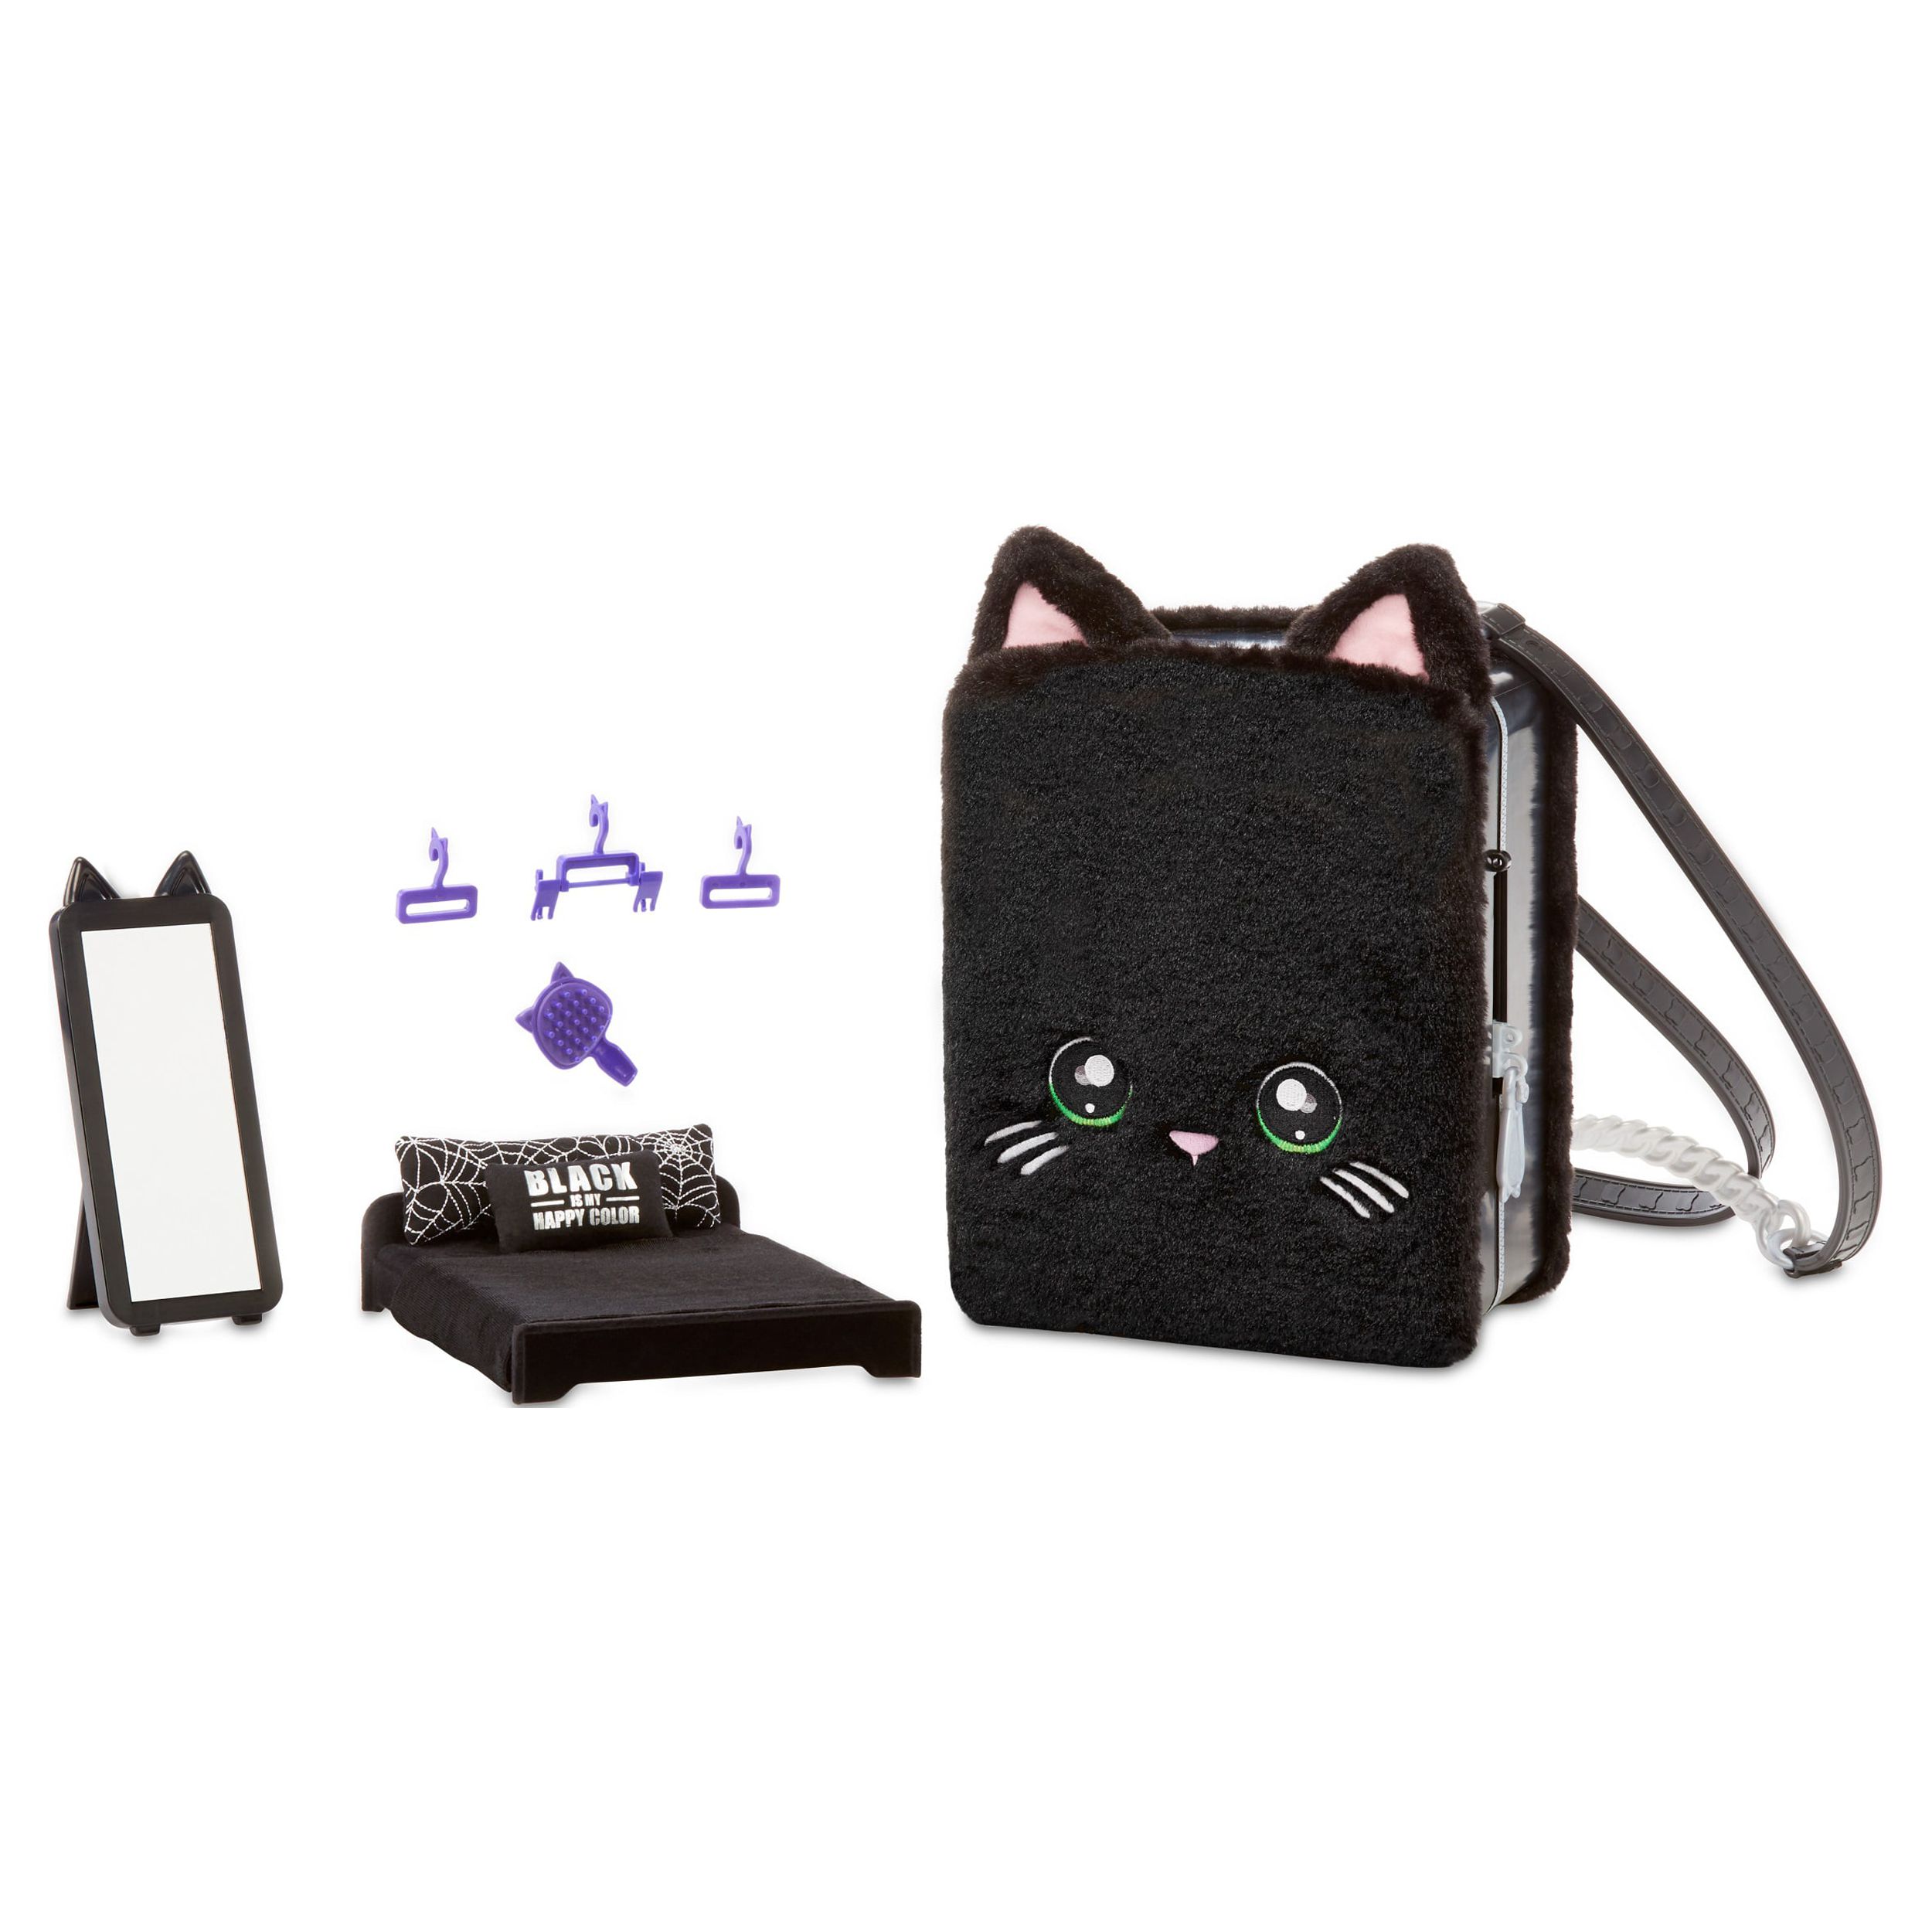 Na! Na! Na! Surprise 3-in-1 Backpack Bedroom Black Kitty with Limited Edition Doll Playset - image 5 of 7